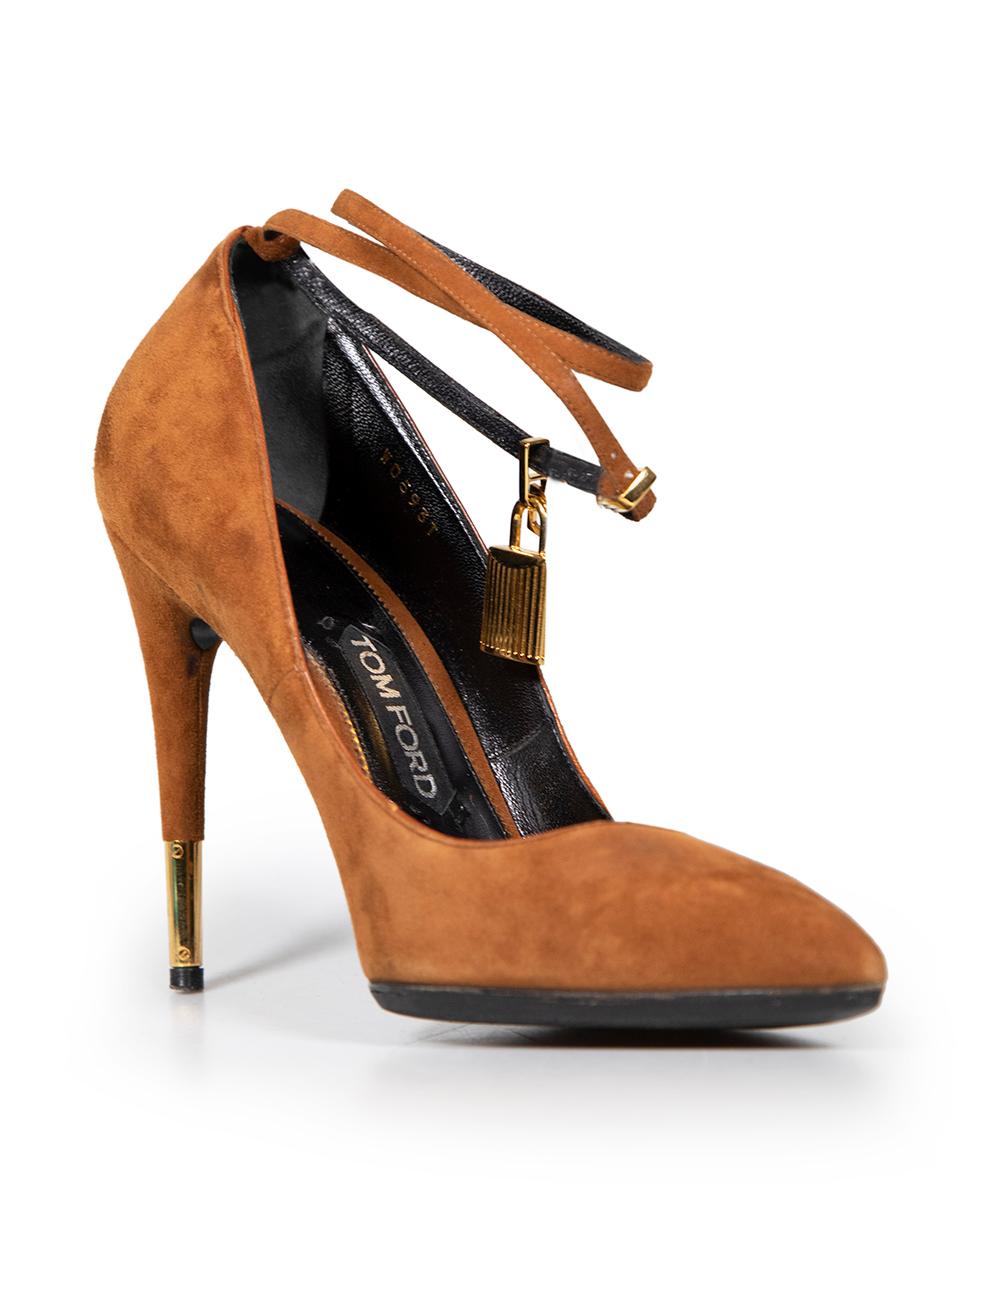 CONDITION is Very good. Minimal wear to shoes is evident. Minimal wear to the metal heels and tips with scratches. The ankle straps also have slight fraying and the right-side of both shoes have a small abrasions on this used Tom Ford designer